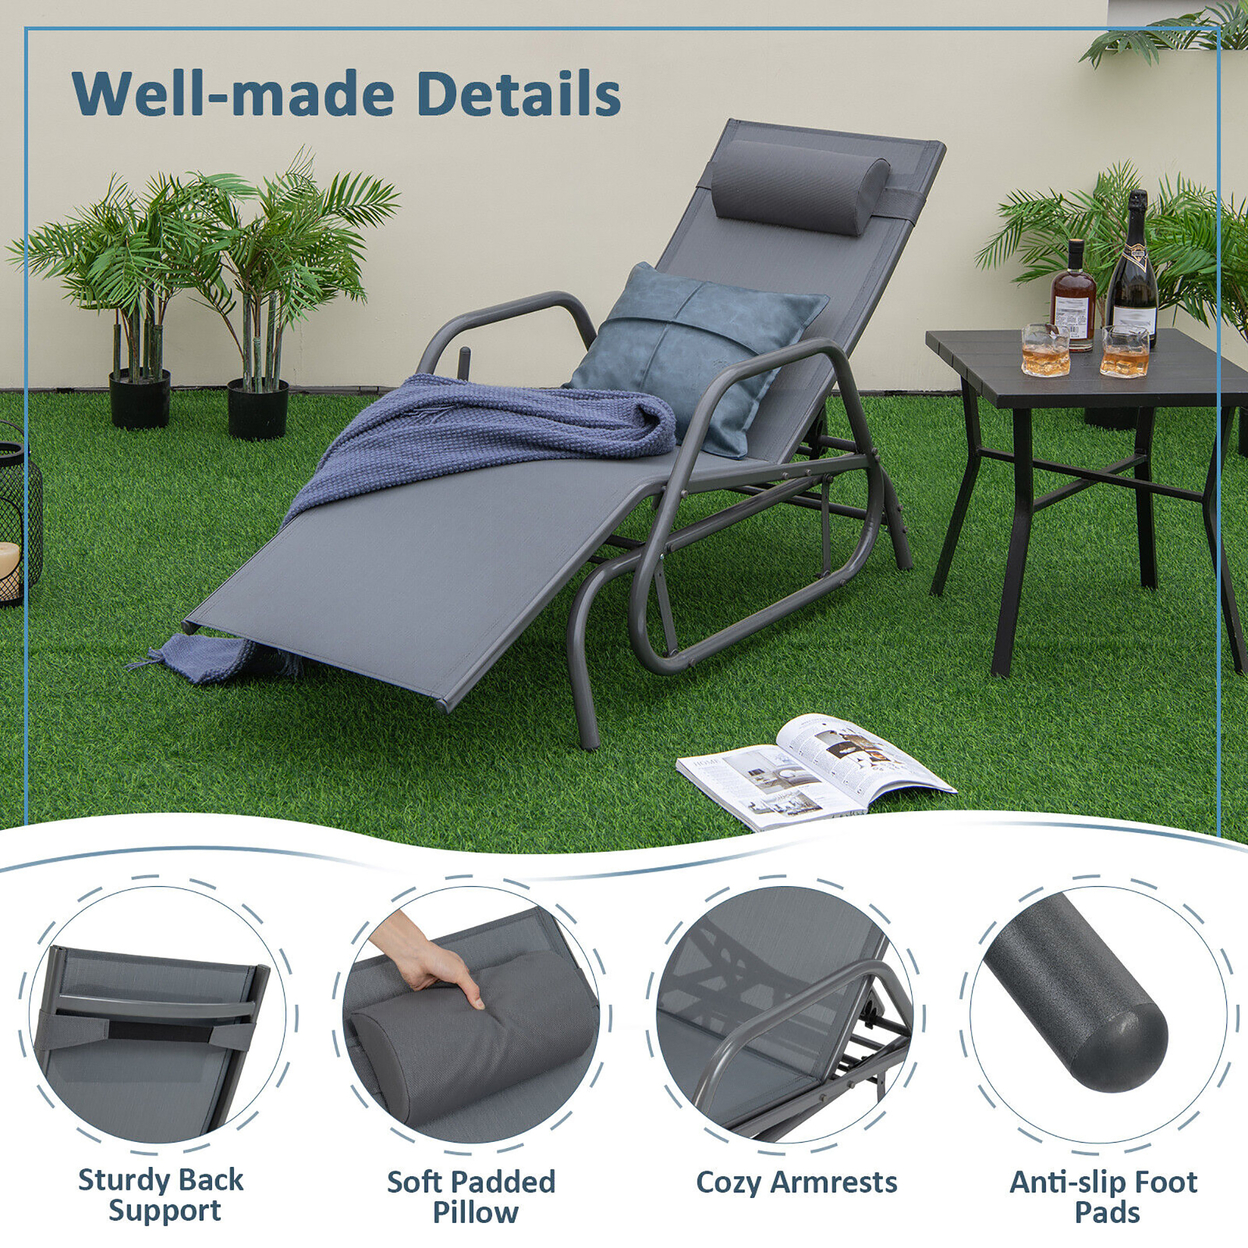 Patio Chaise Lounge Glider Recliner Chair Adjustable Sturdy Metal Frame Outdoor - Brown